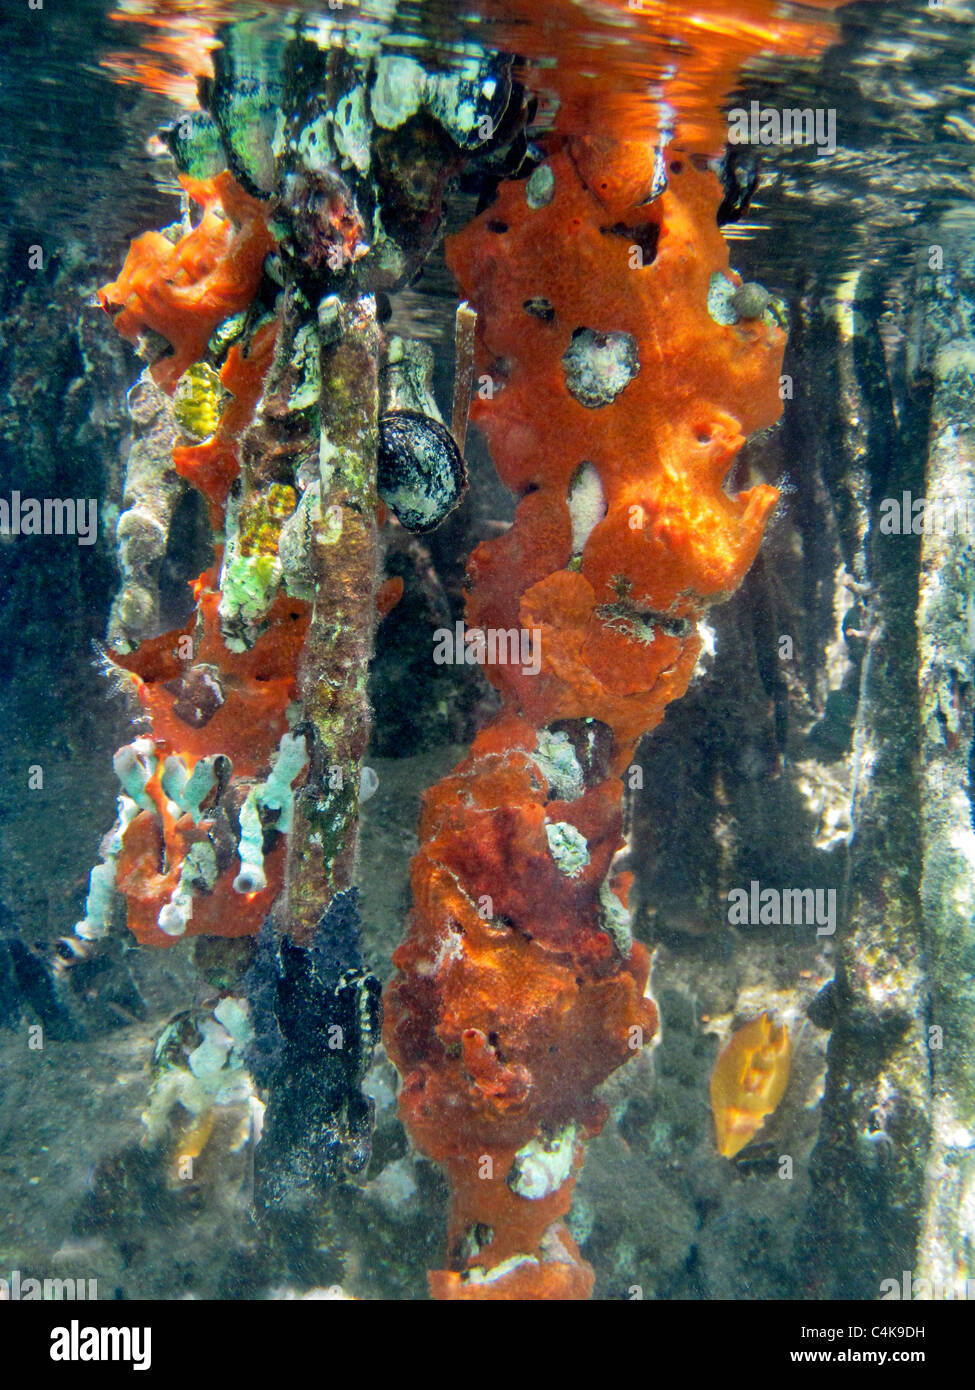 Red sponges and Mangrove roots. St. John. Virgin Islands Stock Photo